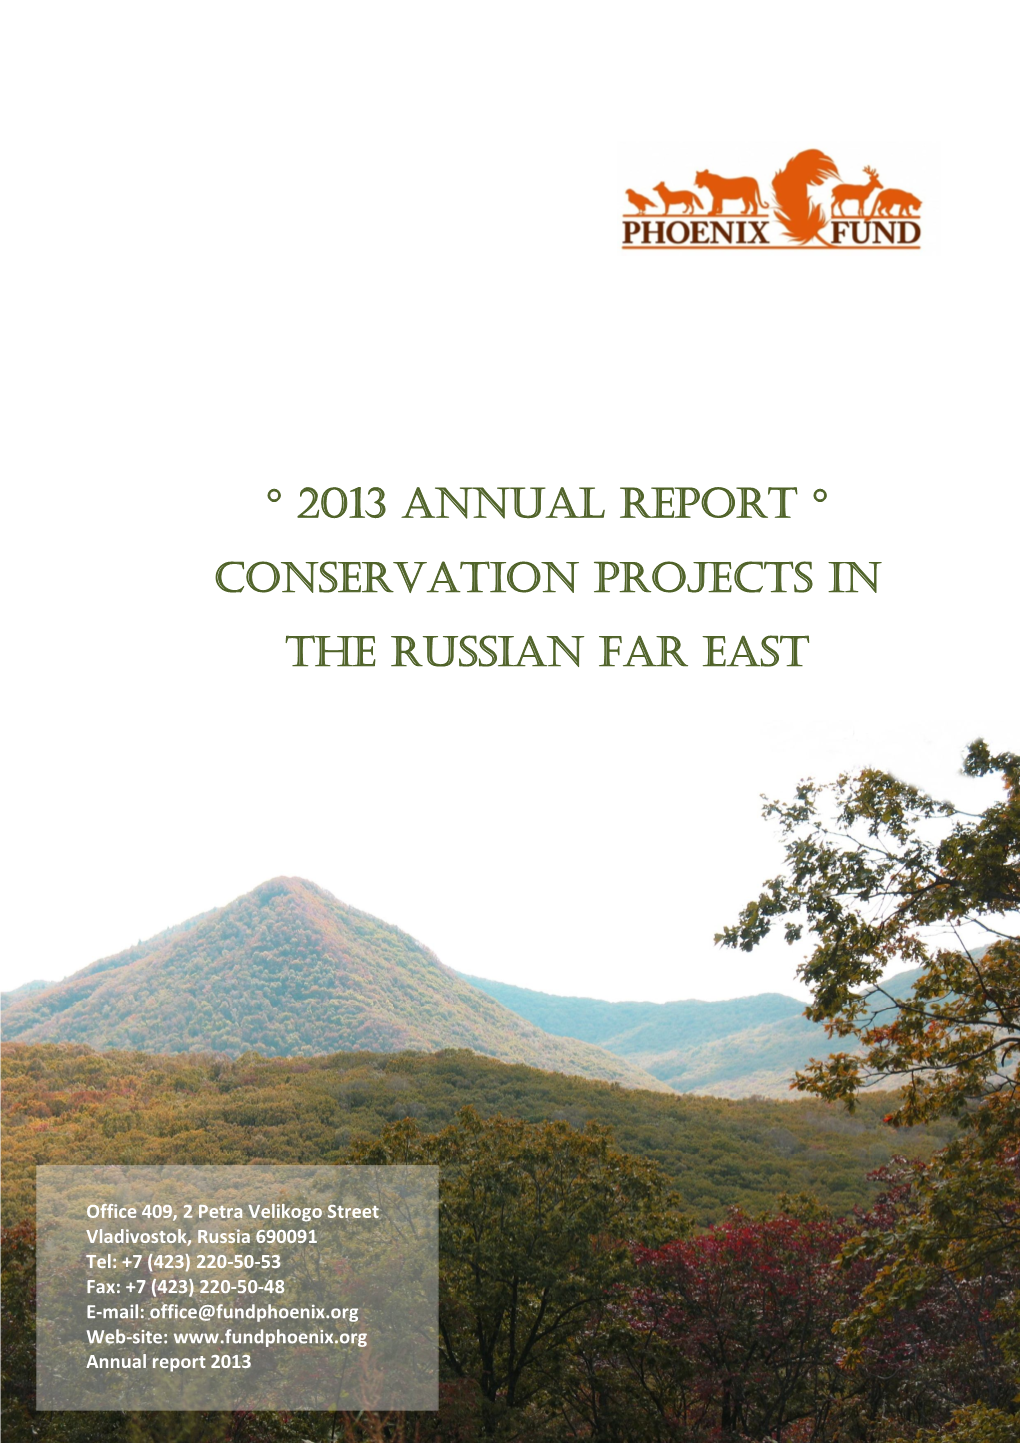 ° 2013 Annual Report ° Conservation Projects in the Russian Far East